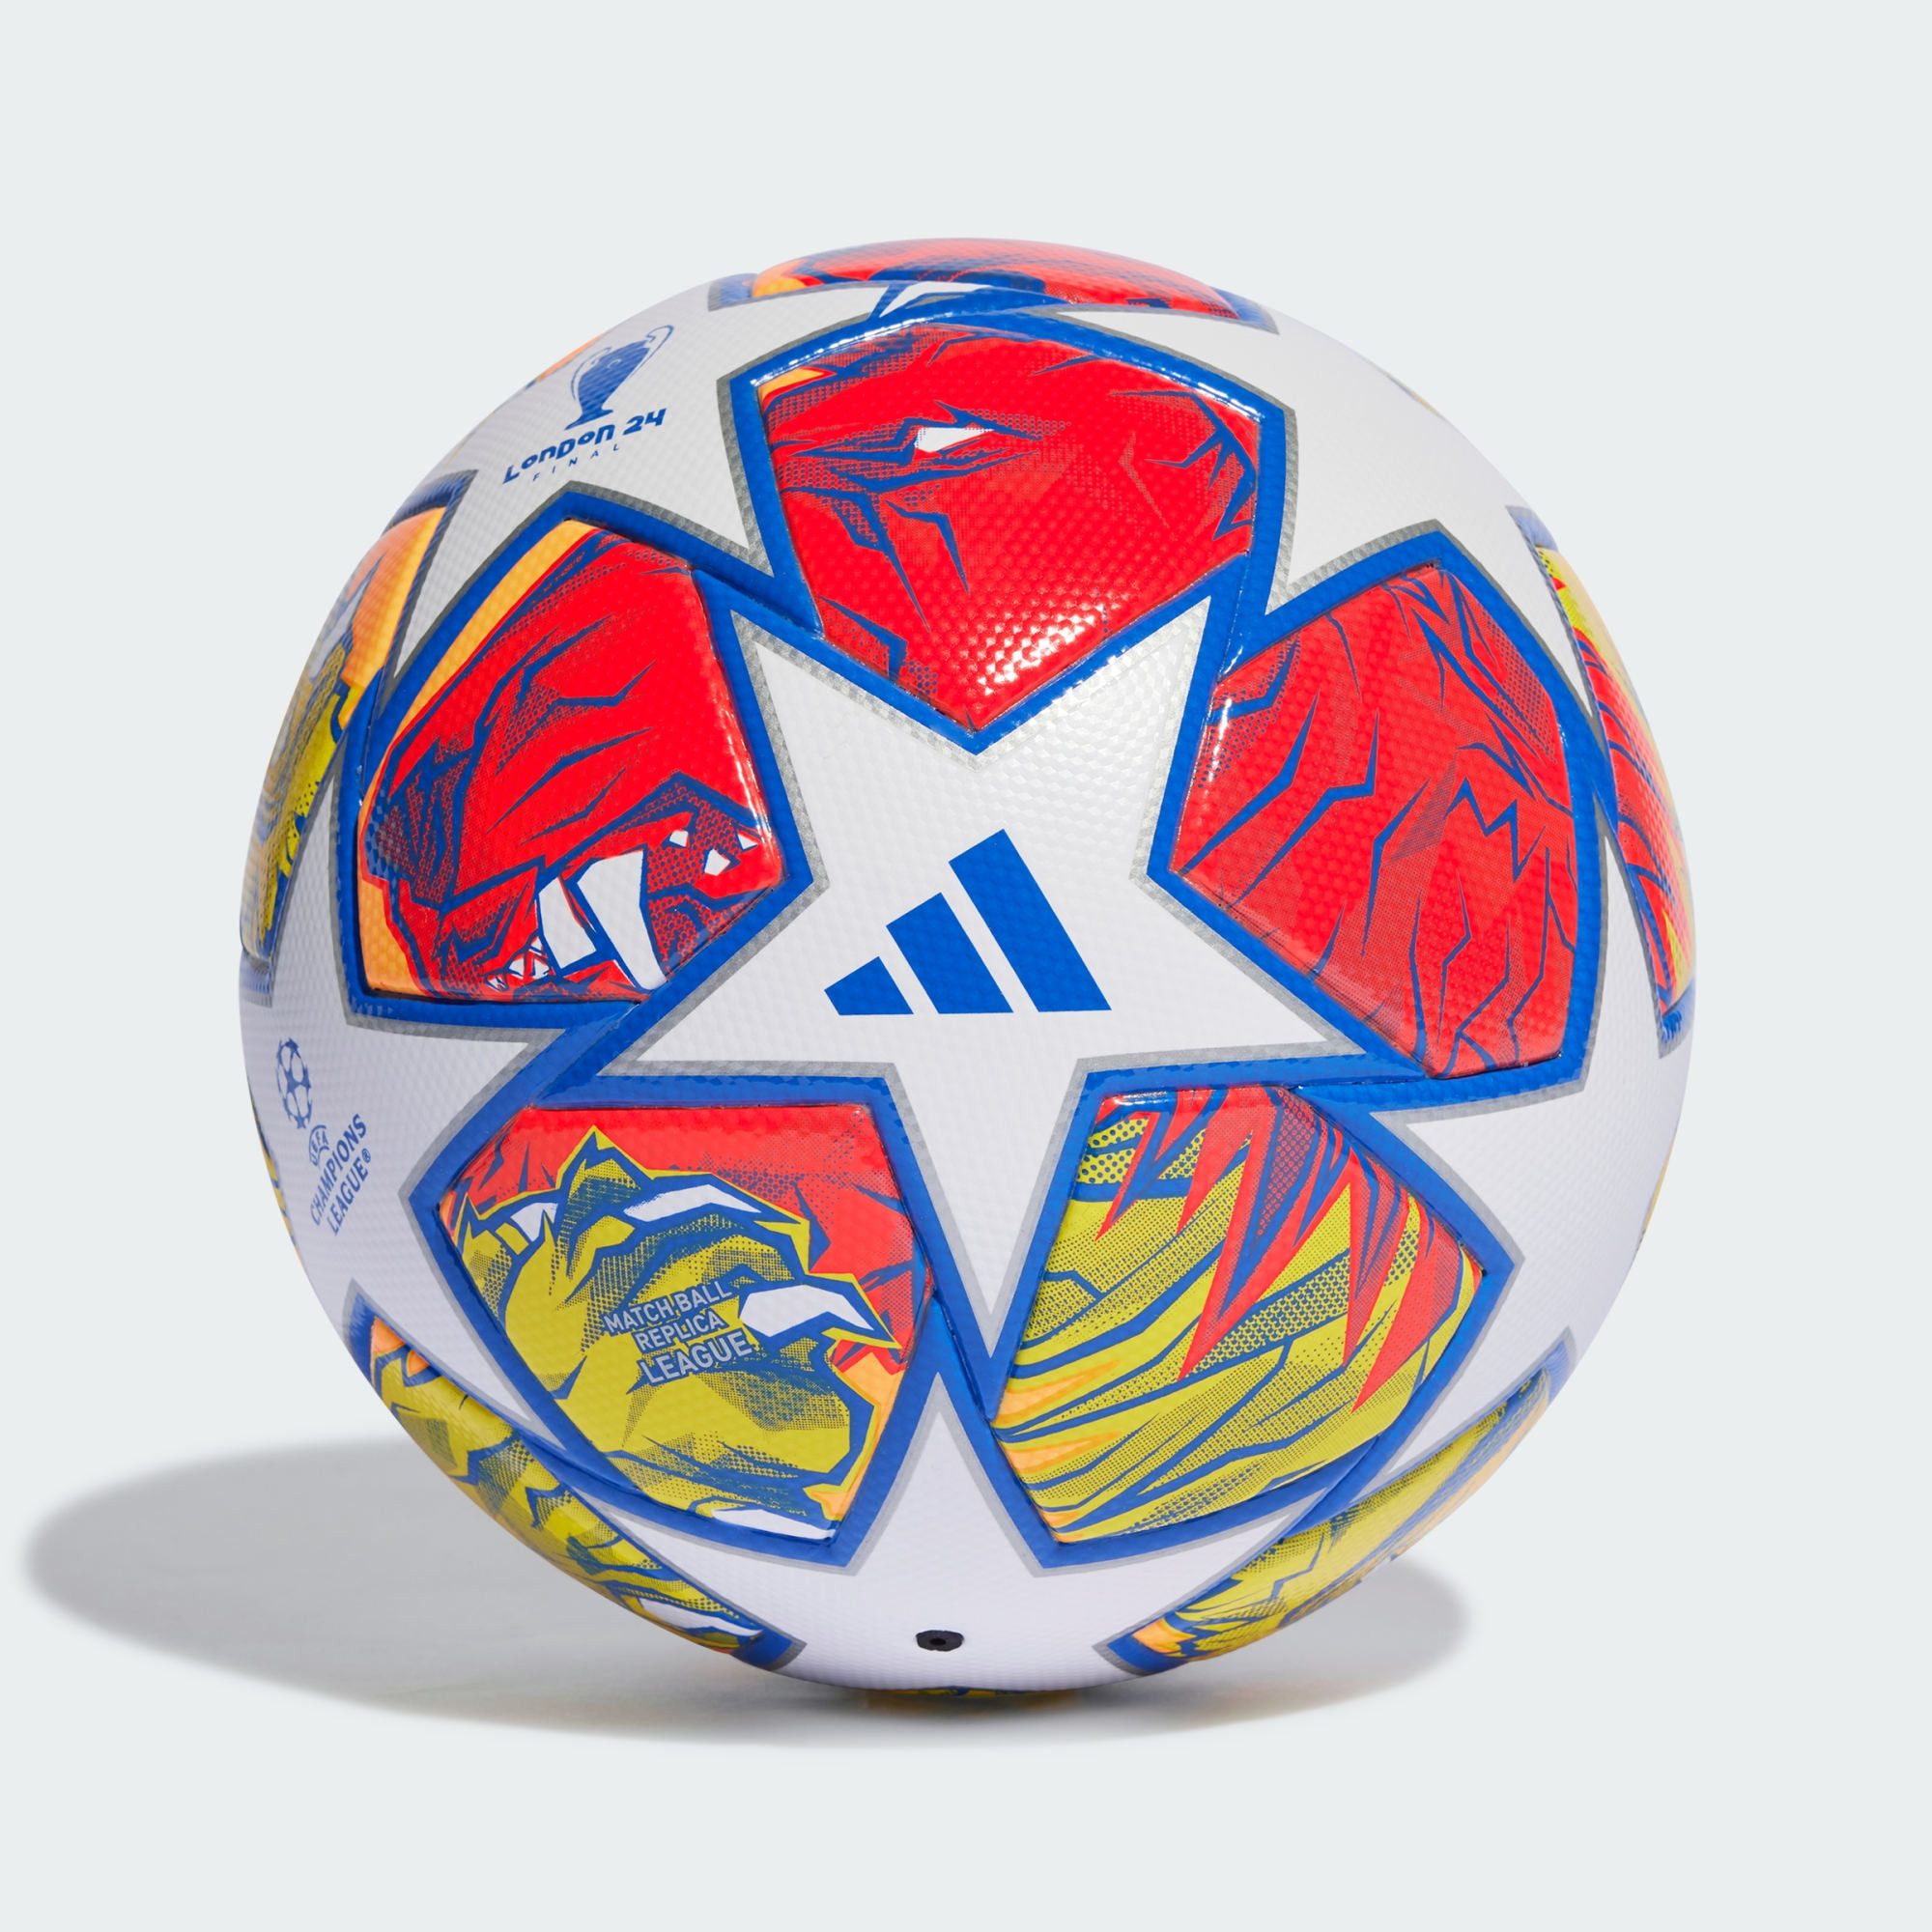 adidas Performance Fußball UCL LEAGUE 23/24 KNOCK-OUT BALL